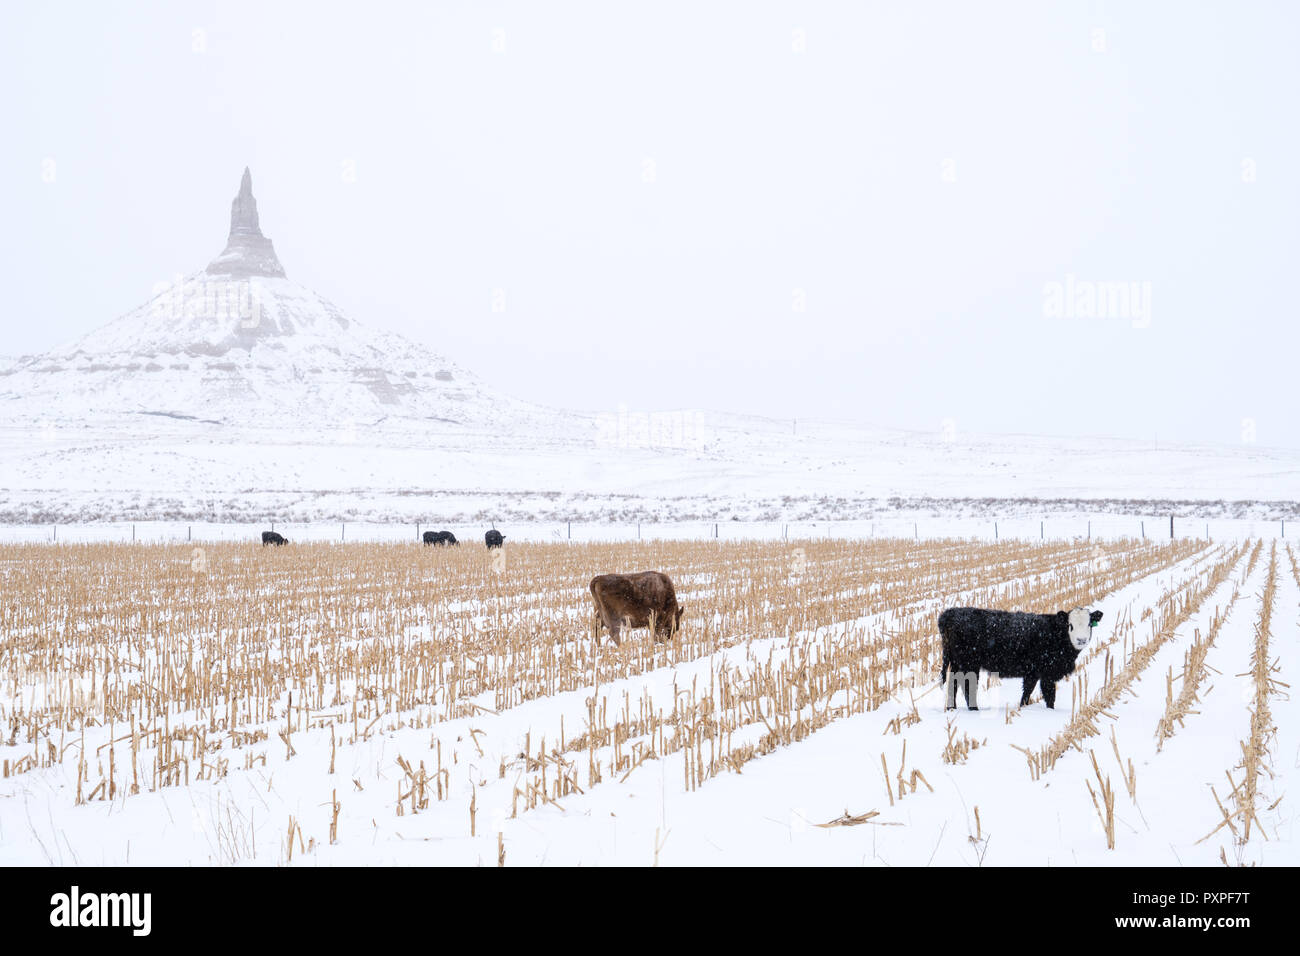 Cows grazing in front of Chimney Rock National Historic Site along the Oregon Trail in Bayard Nebraska during the winter Stock Photo